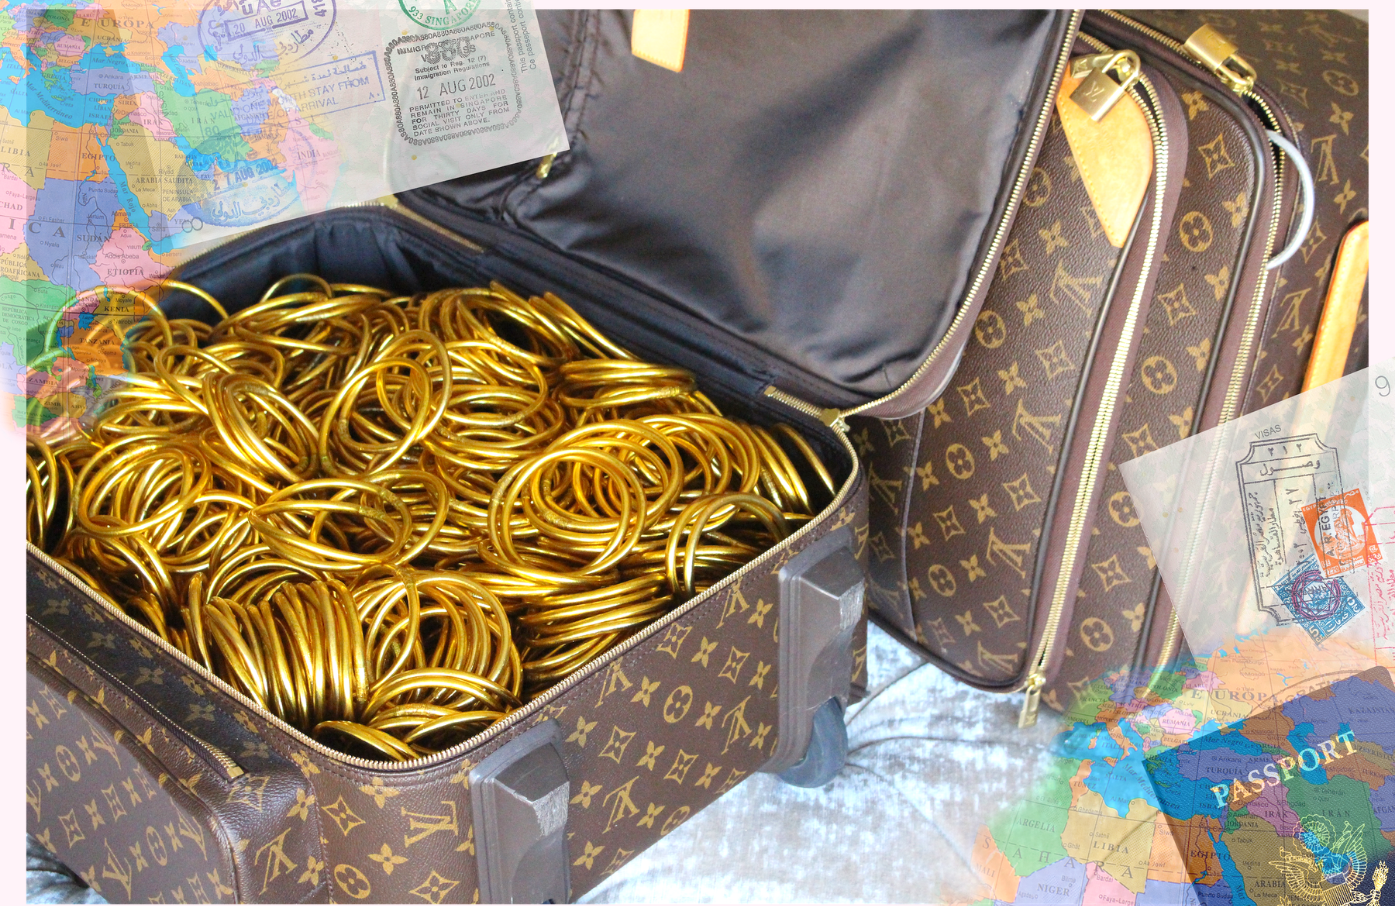 Louis vuitton bag filled with gold bangles | BuDhaGirl